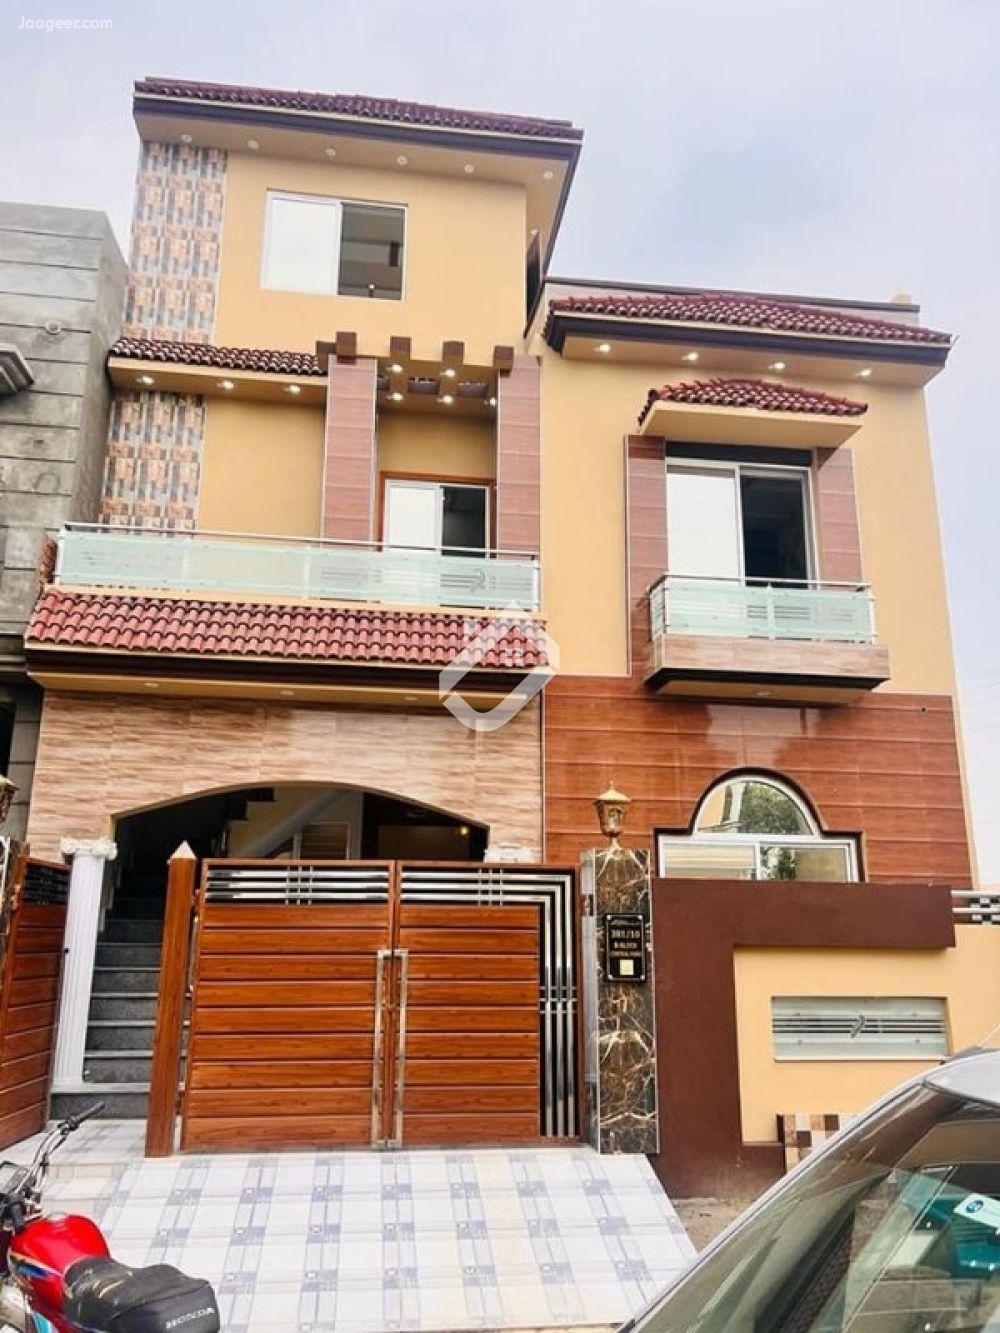 View  5 Marla Double Storey House For Sale At Ferozpur Road in Ferozpur Road, Lahore